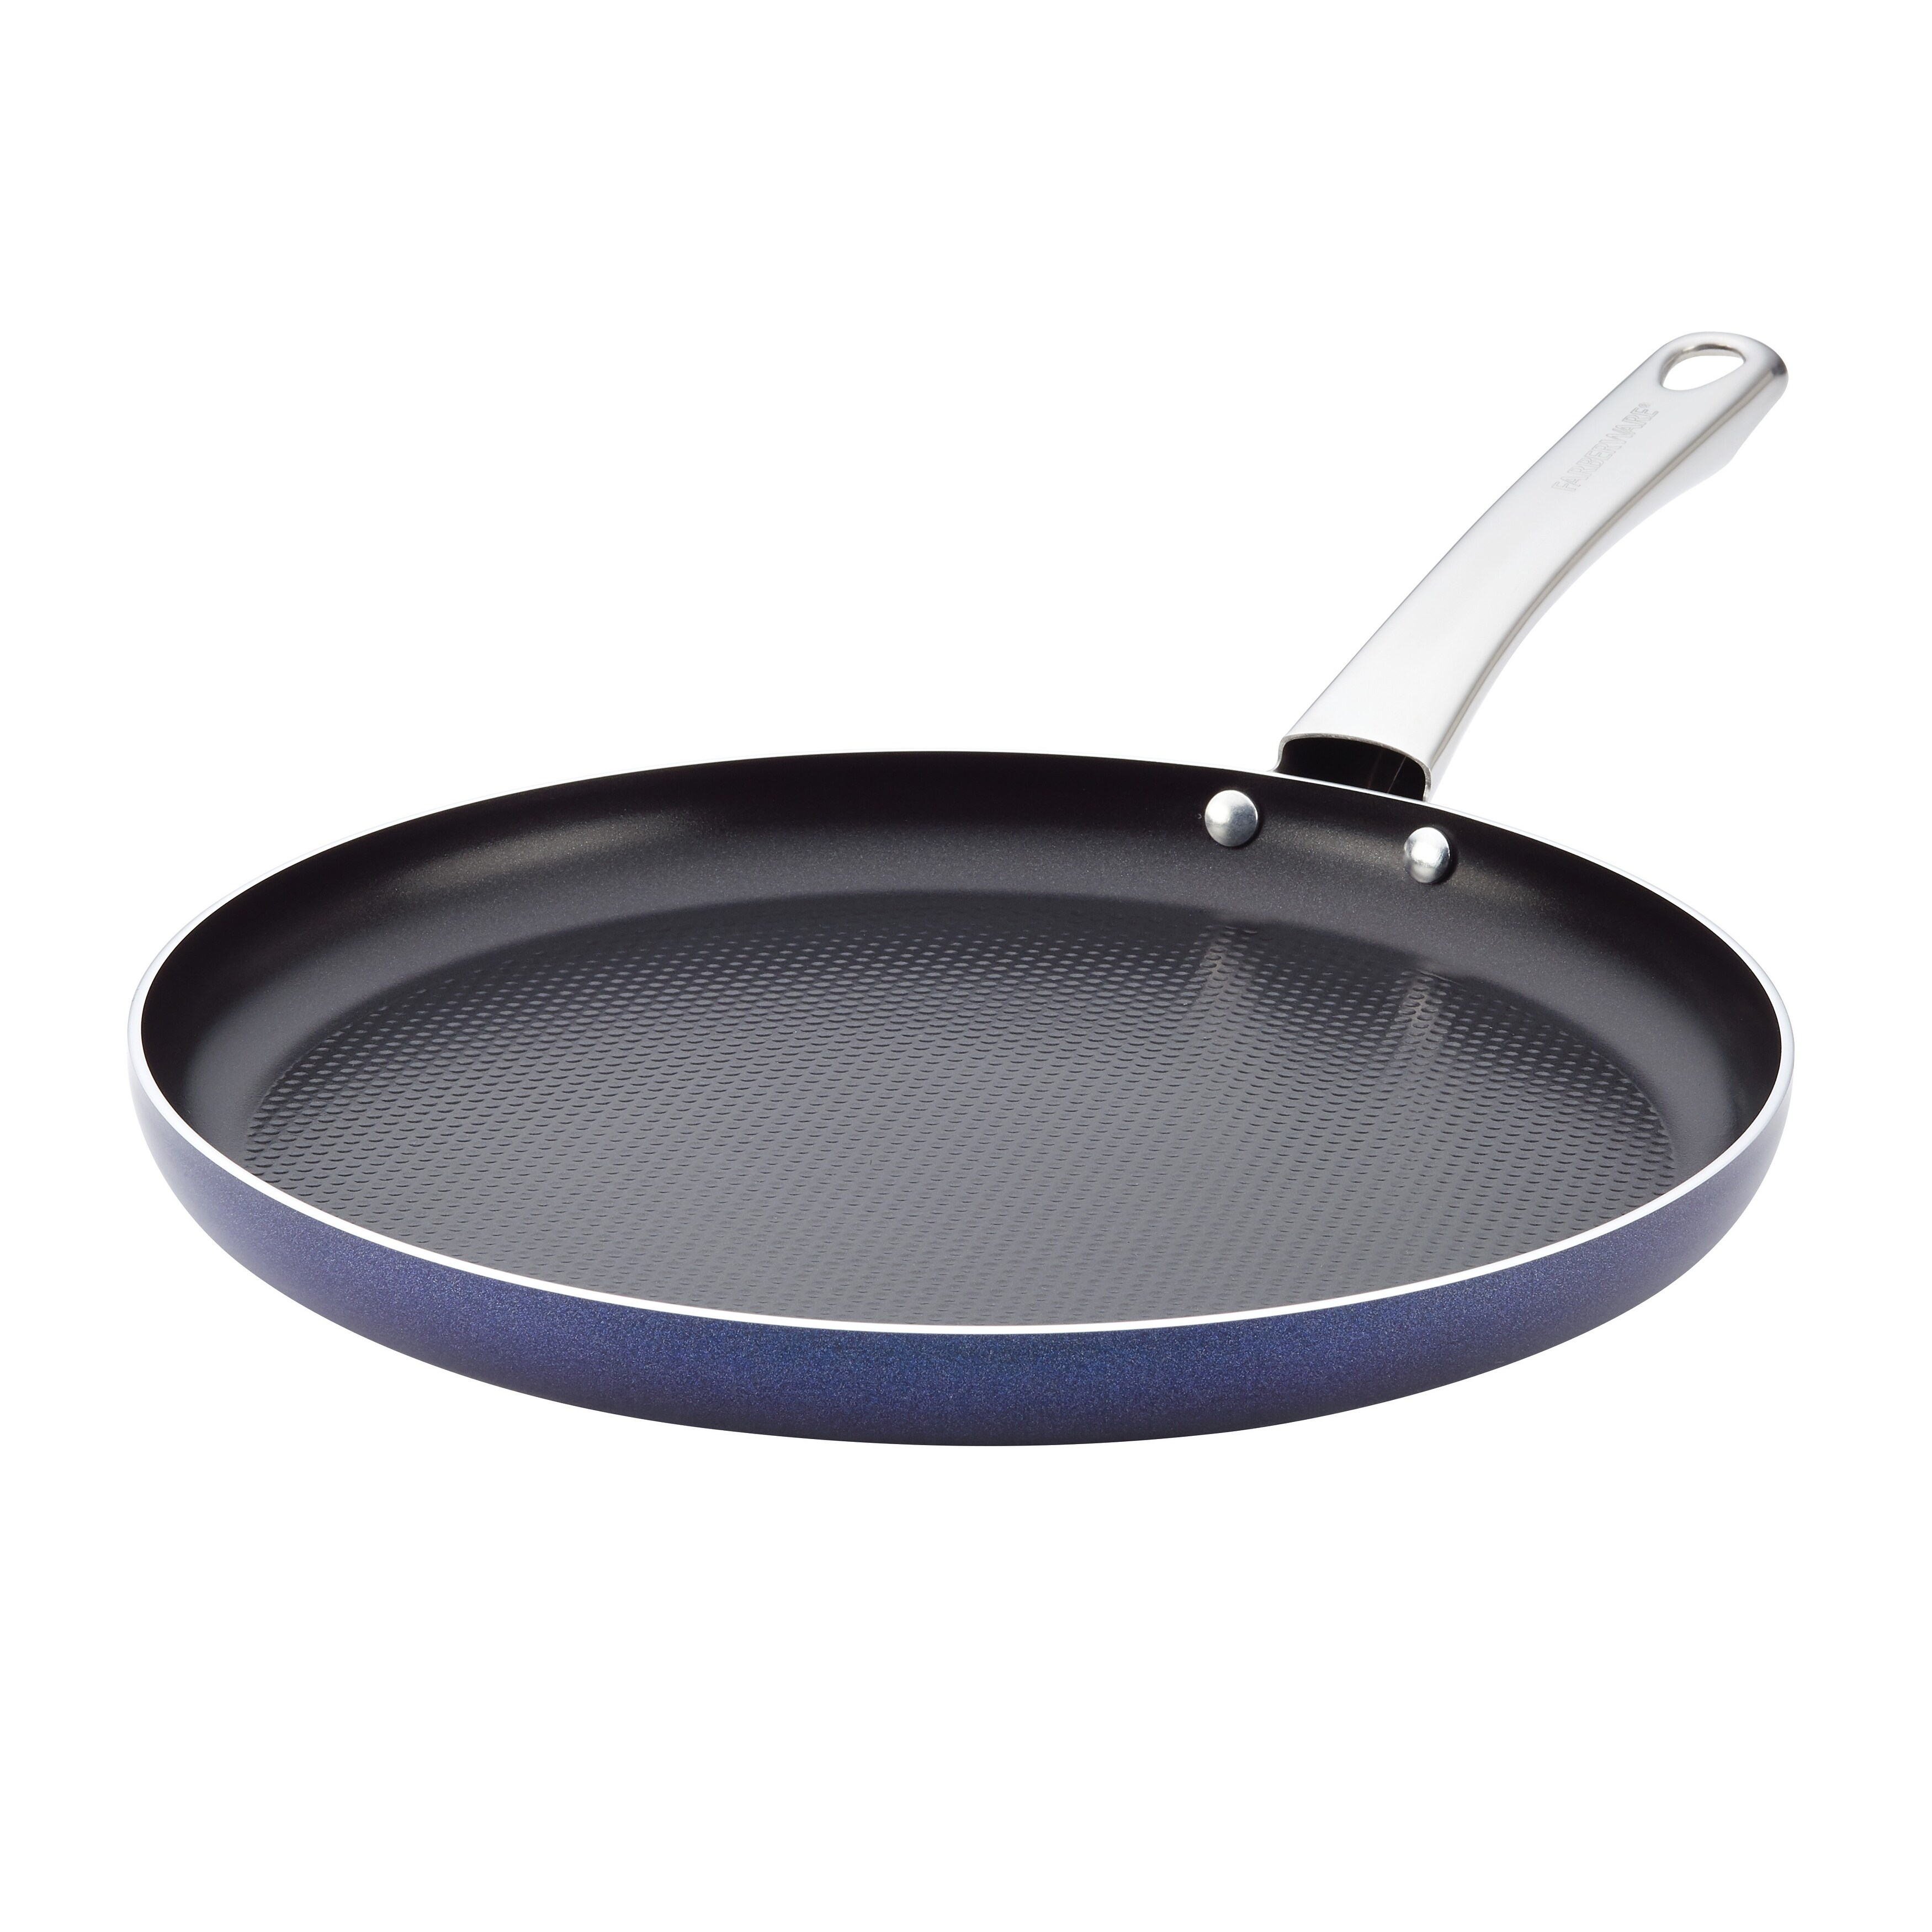 https://ak1.ostkcdn.com/images/products/24038312/Farberware-Luminescence-Nonstick-12-Round-Griddle-Sapphire-Shimmer-321cca98-ae5e-48f9-99c2-947f3c22b28f.jpg